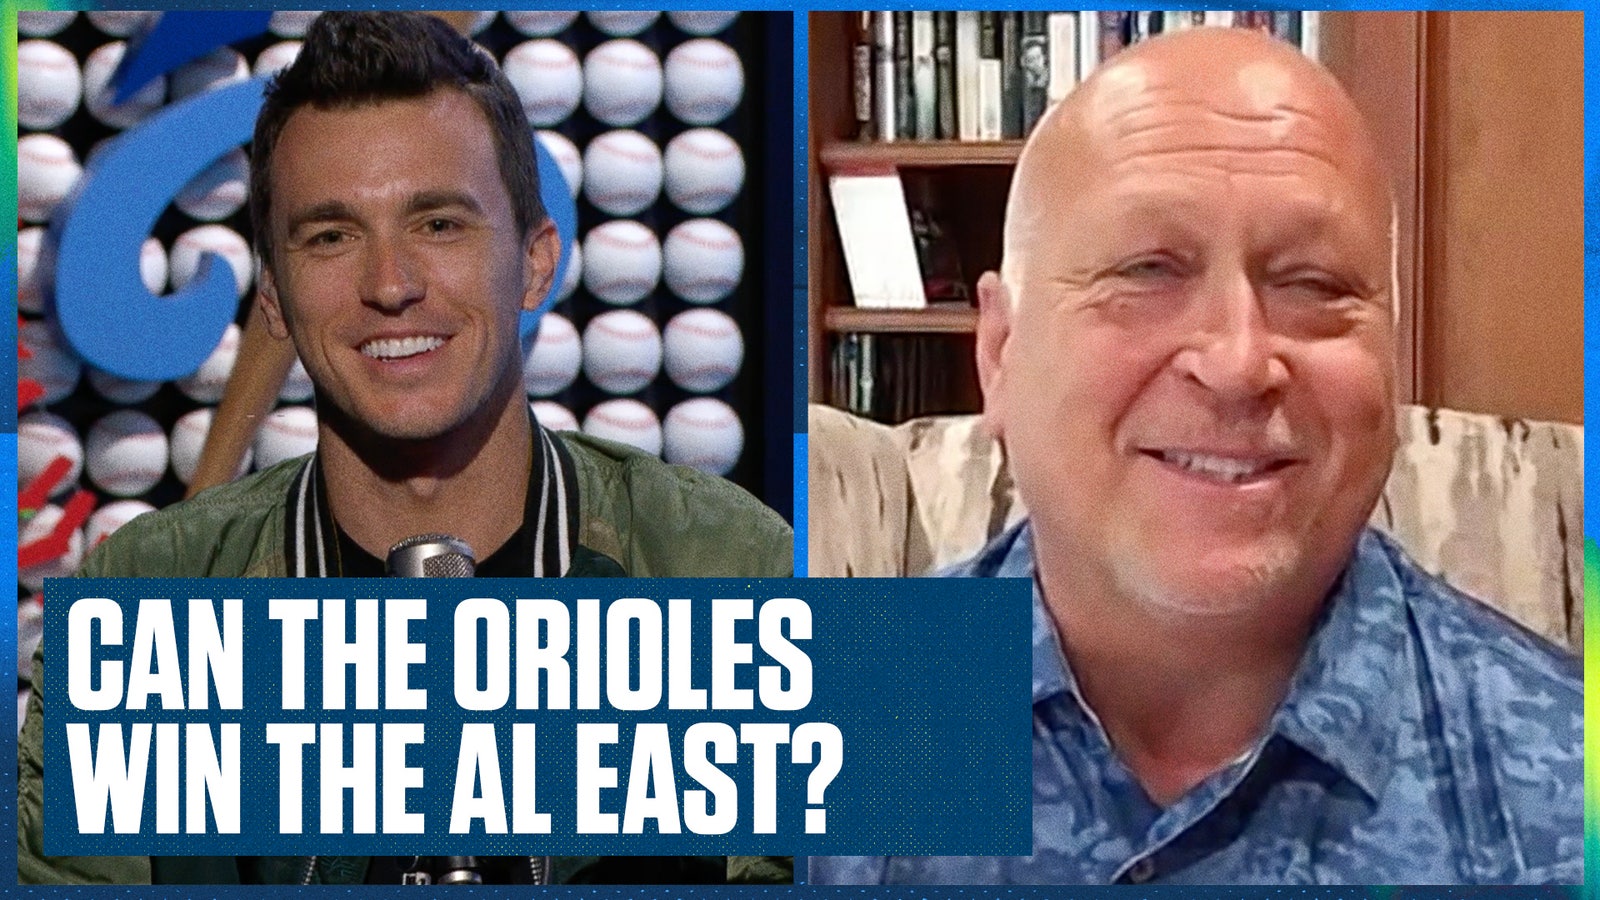 Cal Ripken Jr. on if the Orioles can win the AL East